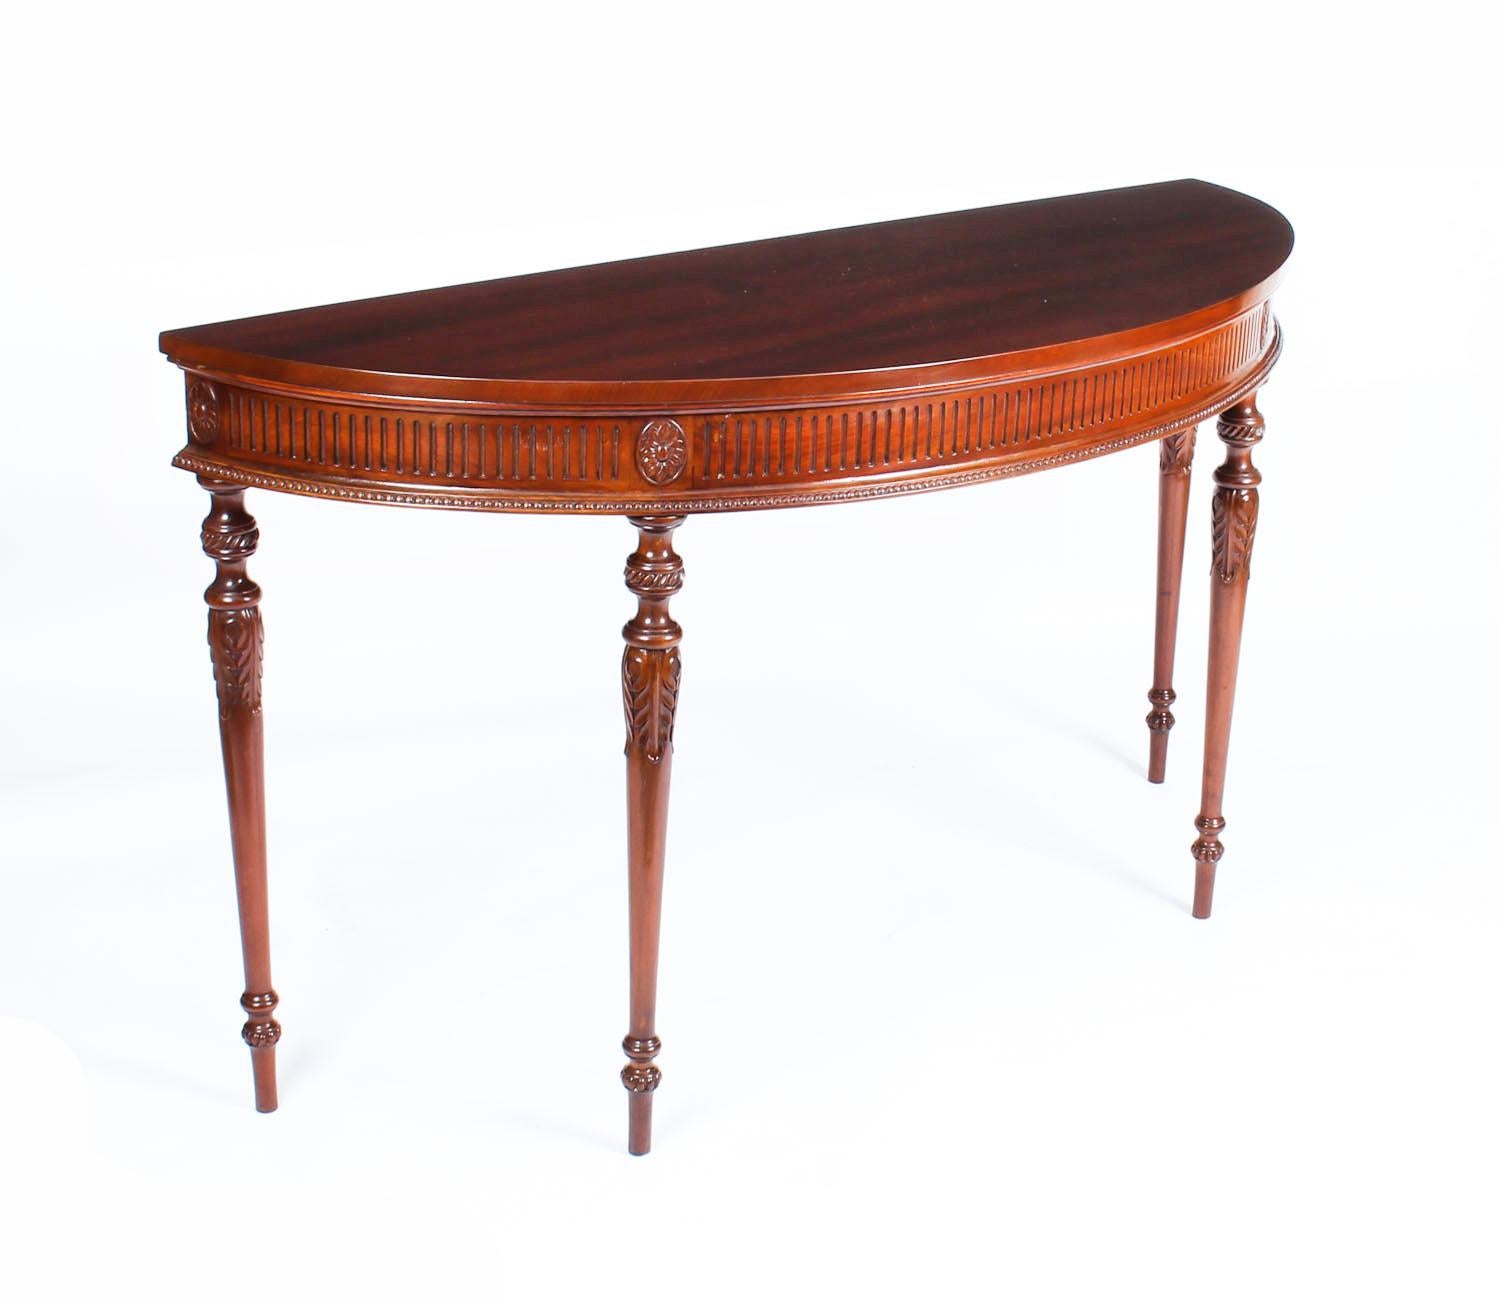 English Antique Pair of Edwardian Mahogany Demilune Console Side Tables, 19th Century